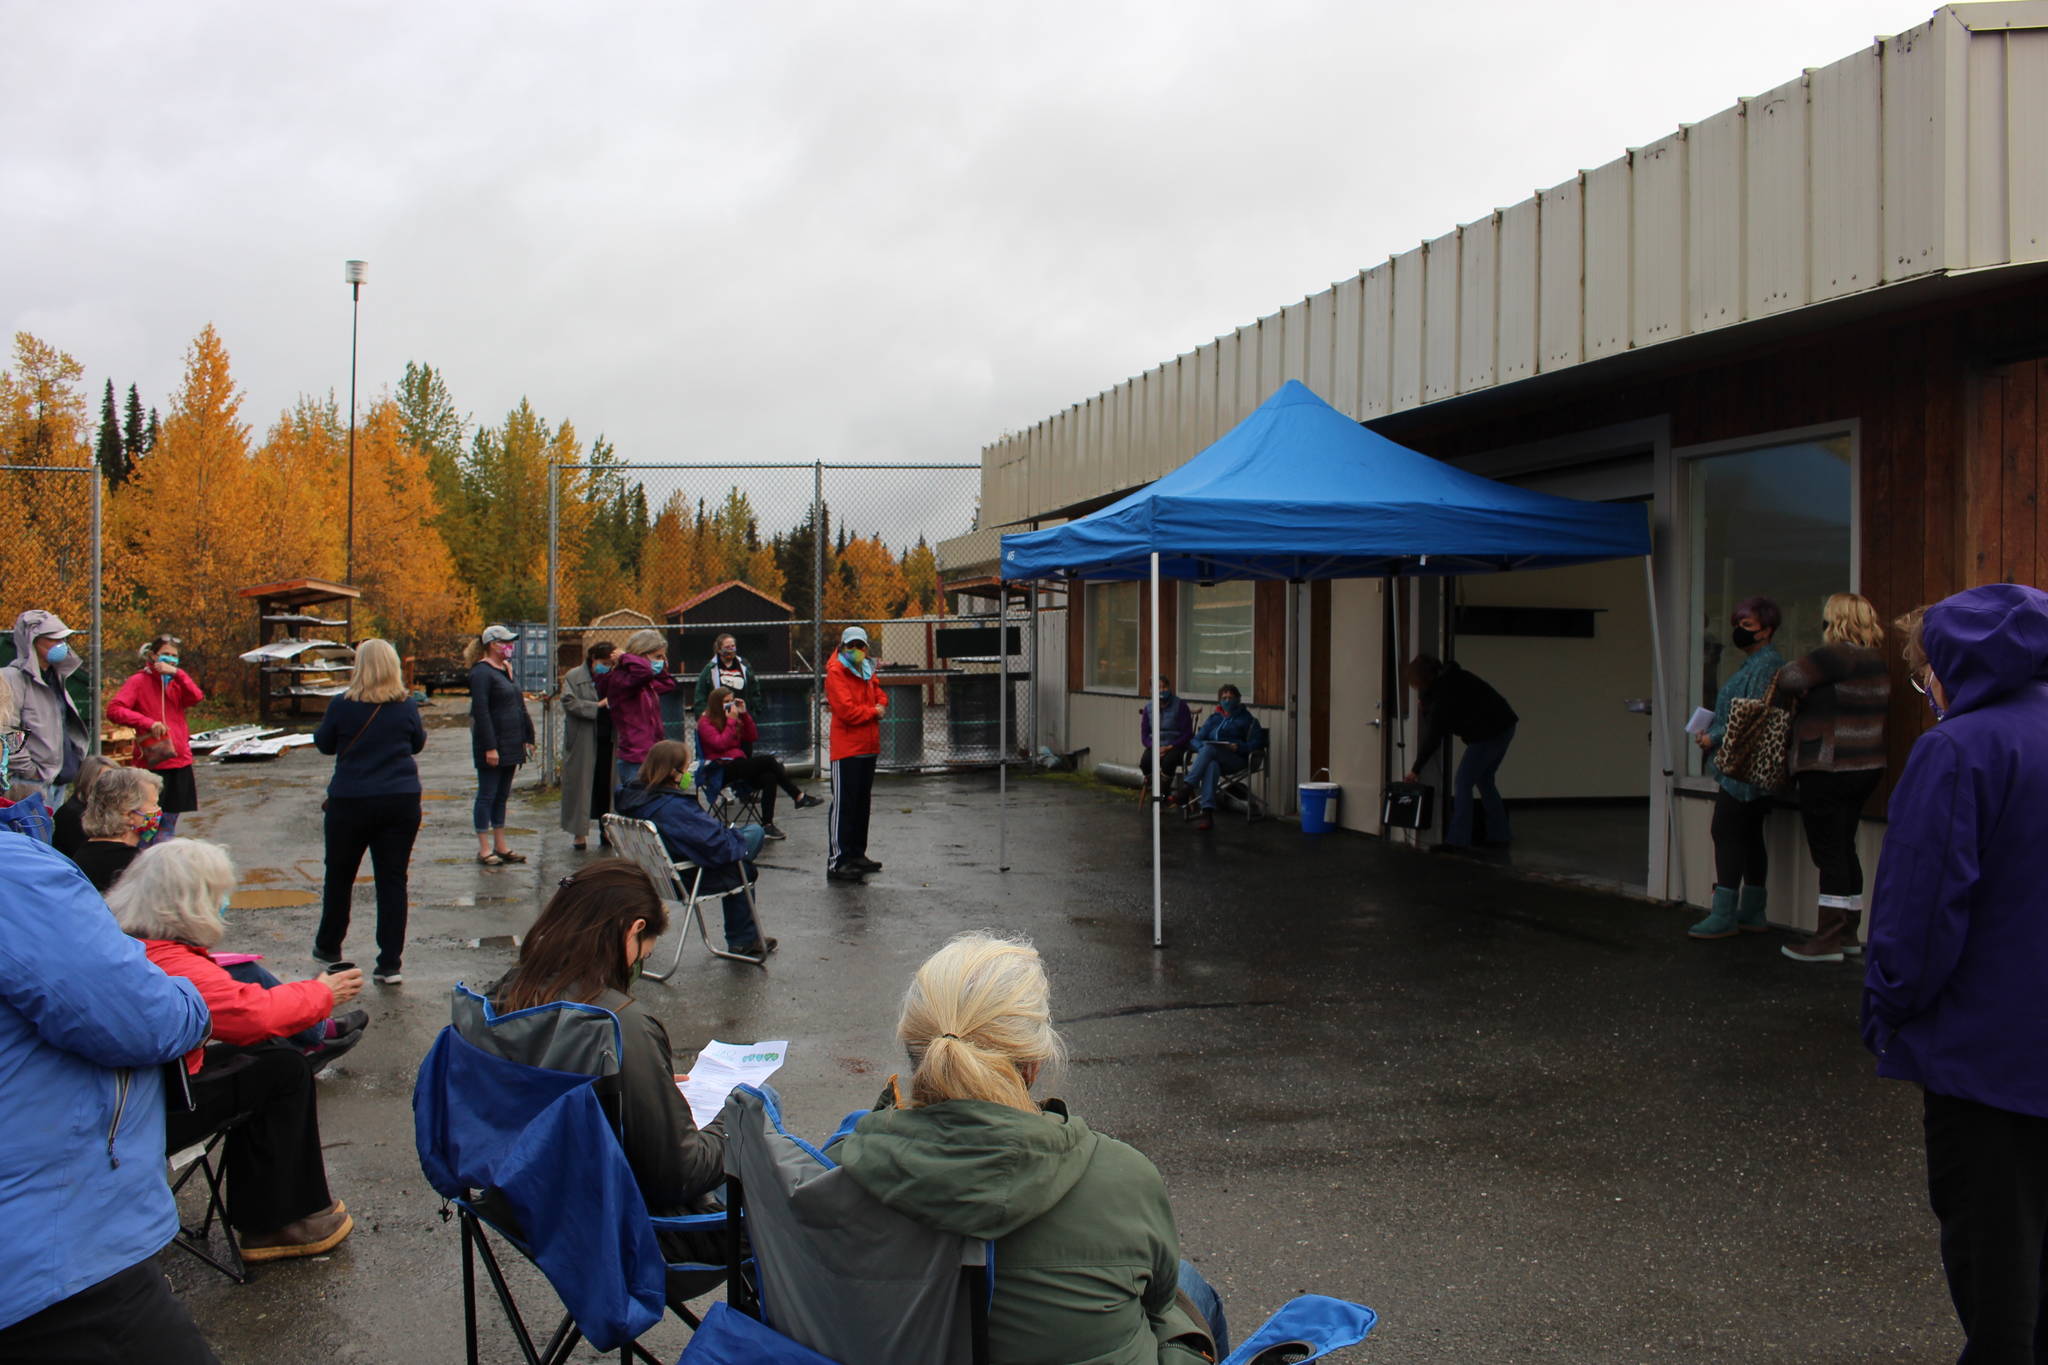 Members of the Soldotna 100+ Women Who Care Group deliberate on which charity or nonprofit will receive their donations this quarter at BuildUP in Sterling, Alaska on Sept. 24, 2020. (Photo by Brian Mazurek)